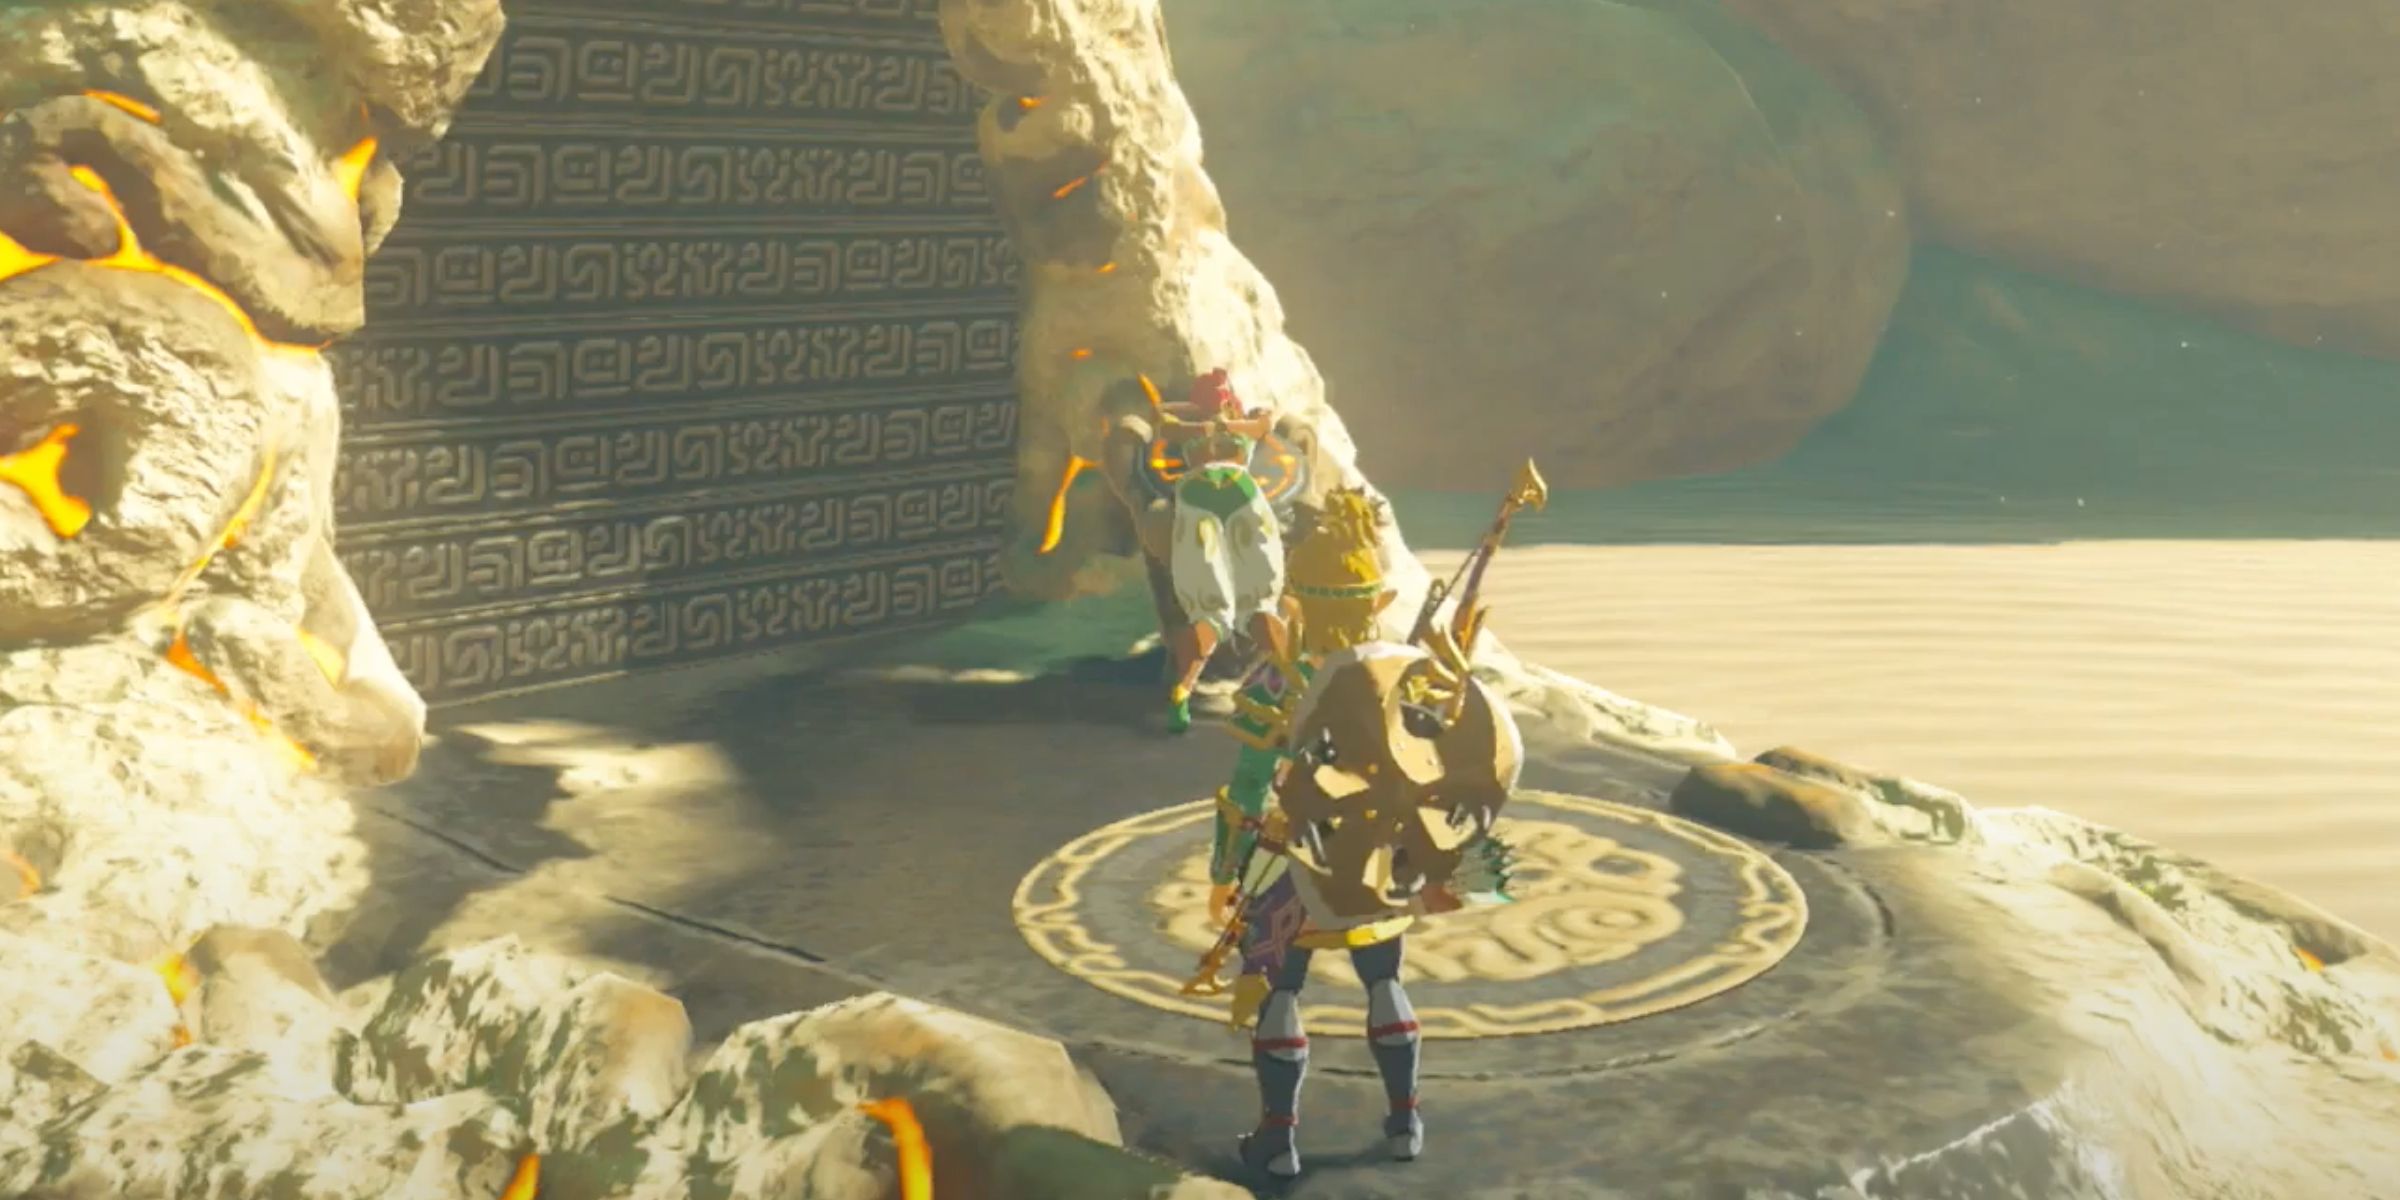 Zelda BOTW Noble Pursuit for Pokki Shrine with Pokki Passed Out on Activation Stone